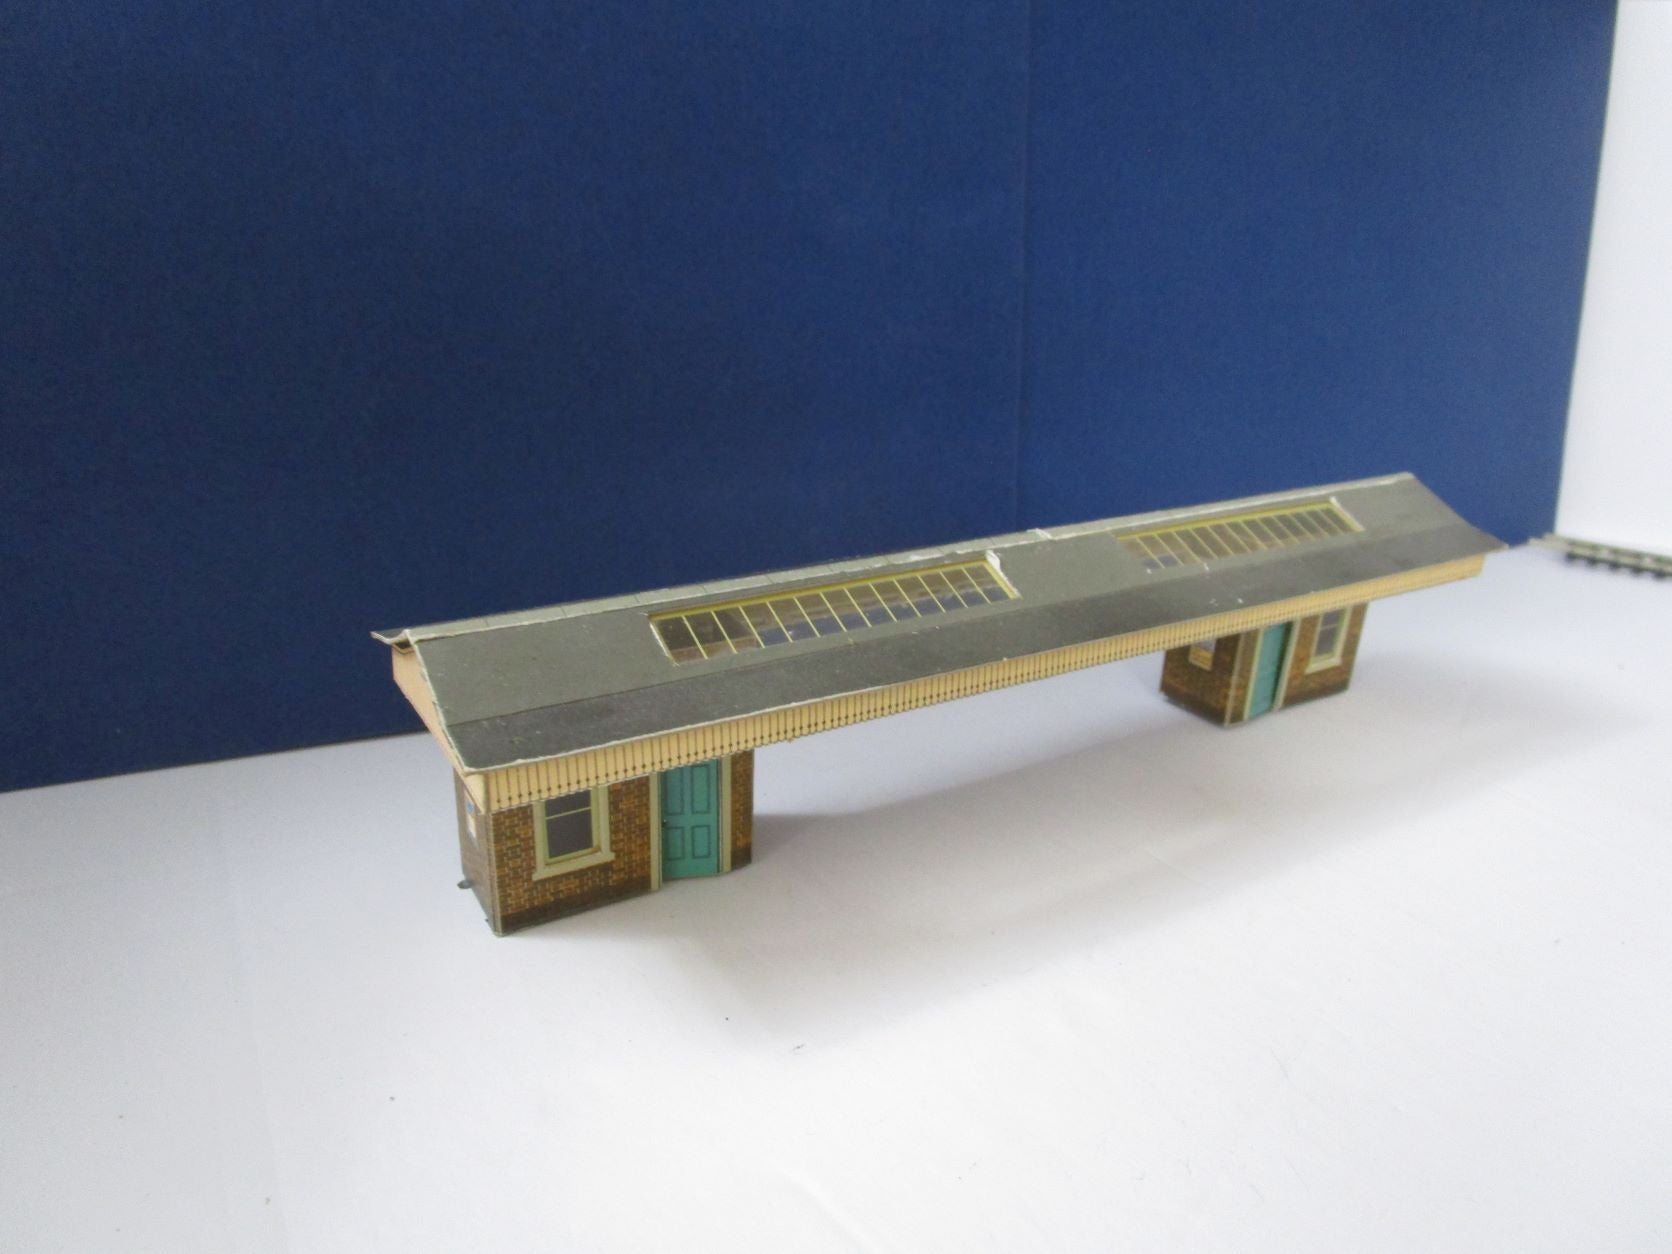 UB071 Ready built Station Canopy - pre-owned